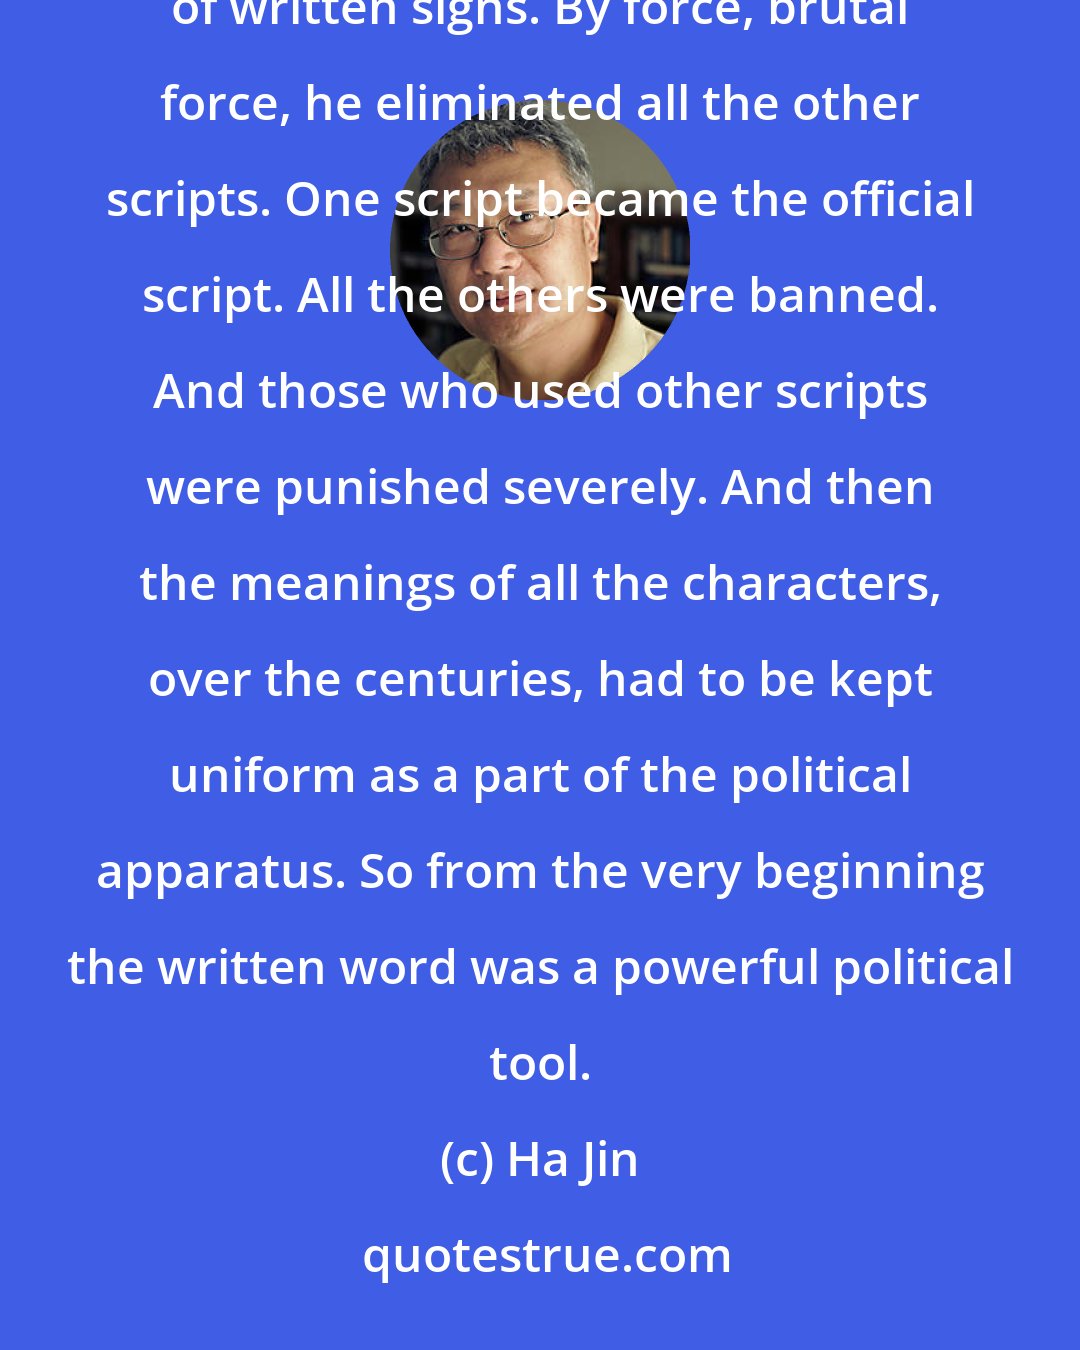 Ha Jin: When the first emperor wanted to unify the country, one of the major policies was to create one system of written signs. By force, brutal force, he eliminated all the other scripts. One script became the official script. All the others were banned. And those who used other scripts were punished severely. And then the meanings of all the characters, over the centuries, had to be kept uniform as a part of the political apparatus. So from the very beginning the written word was a powerful political tool.